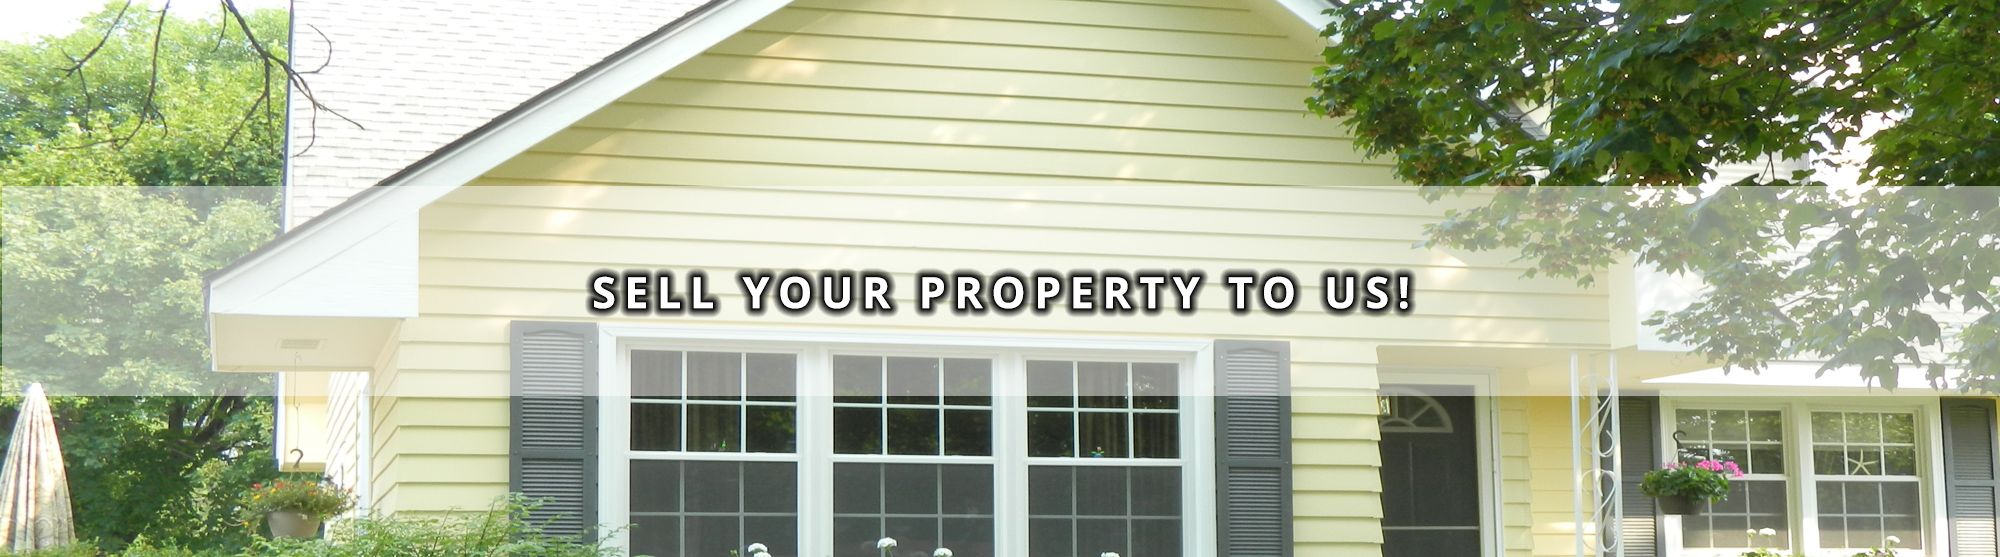 Sell Your Property To Us!